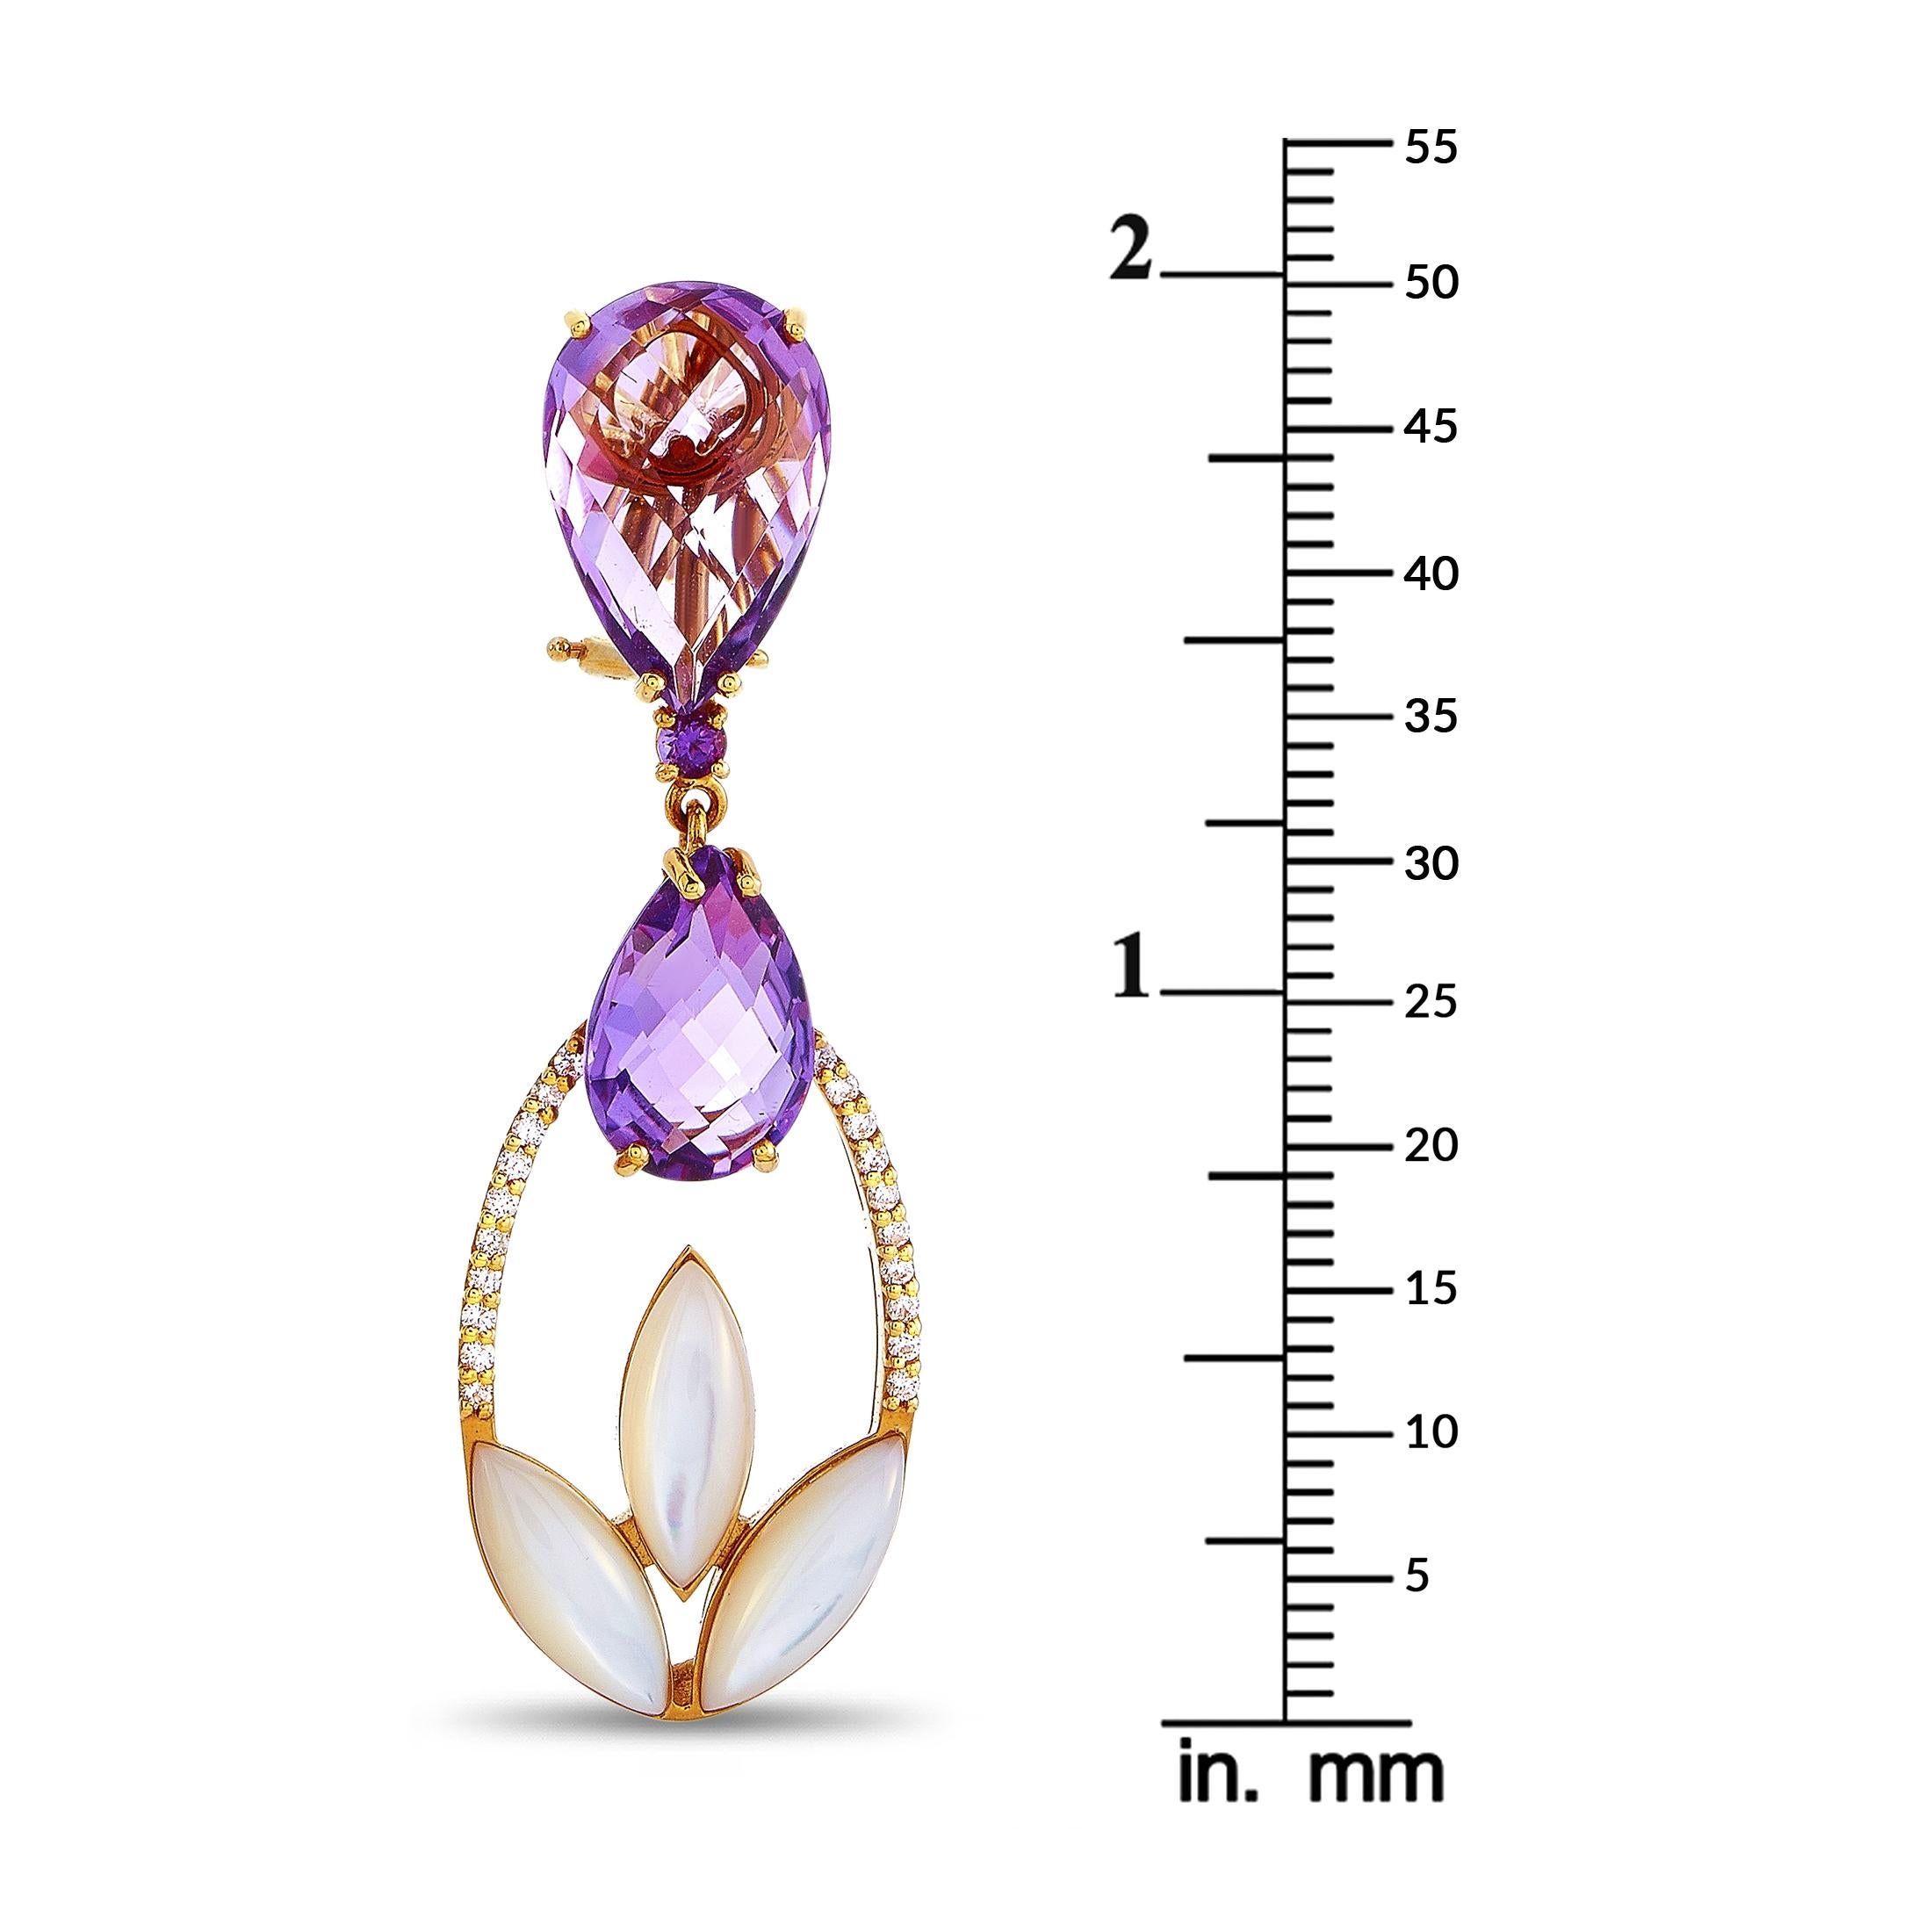 Women's Oro Trend 18K Rose Gold 0.35 ct Diamond, Amethyst and Mother of Pearl Earrings